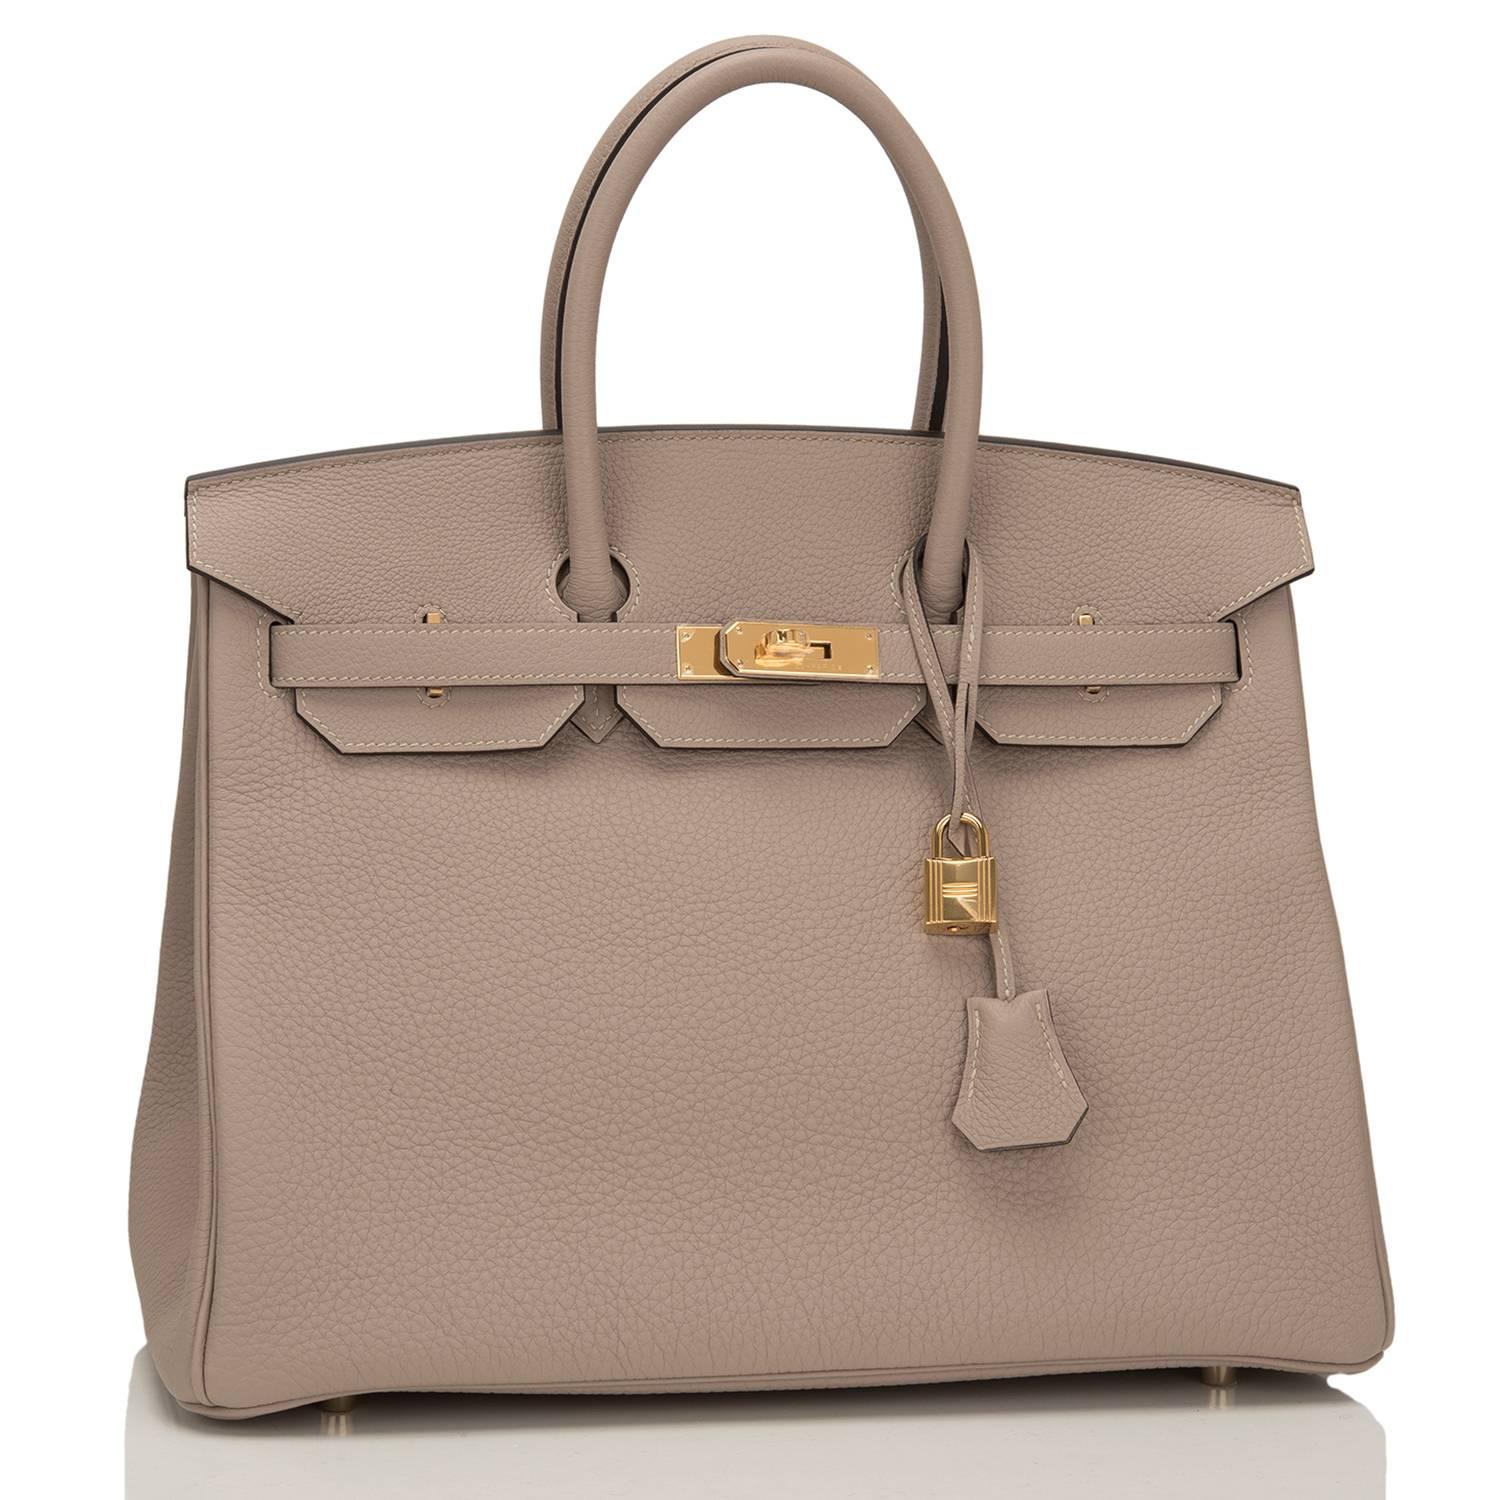 Hermes Gris Tourterelle Birkin 35cm in togo leather with gold hardware.

This Birkin features tonal stitching, front toggle closure, clochette with lock and two keys, and double rolled handles.

The interior is lined in Gris Tourterelle chevre with